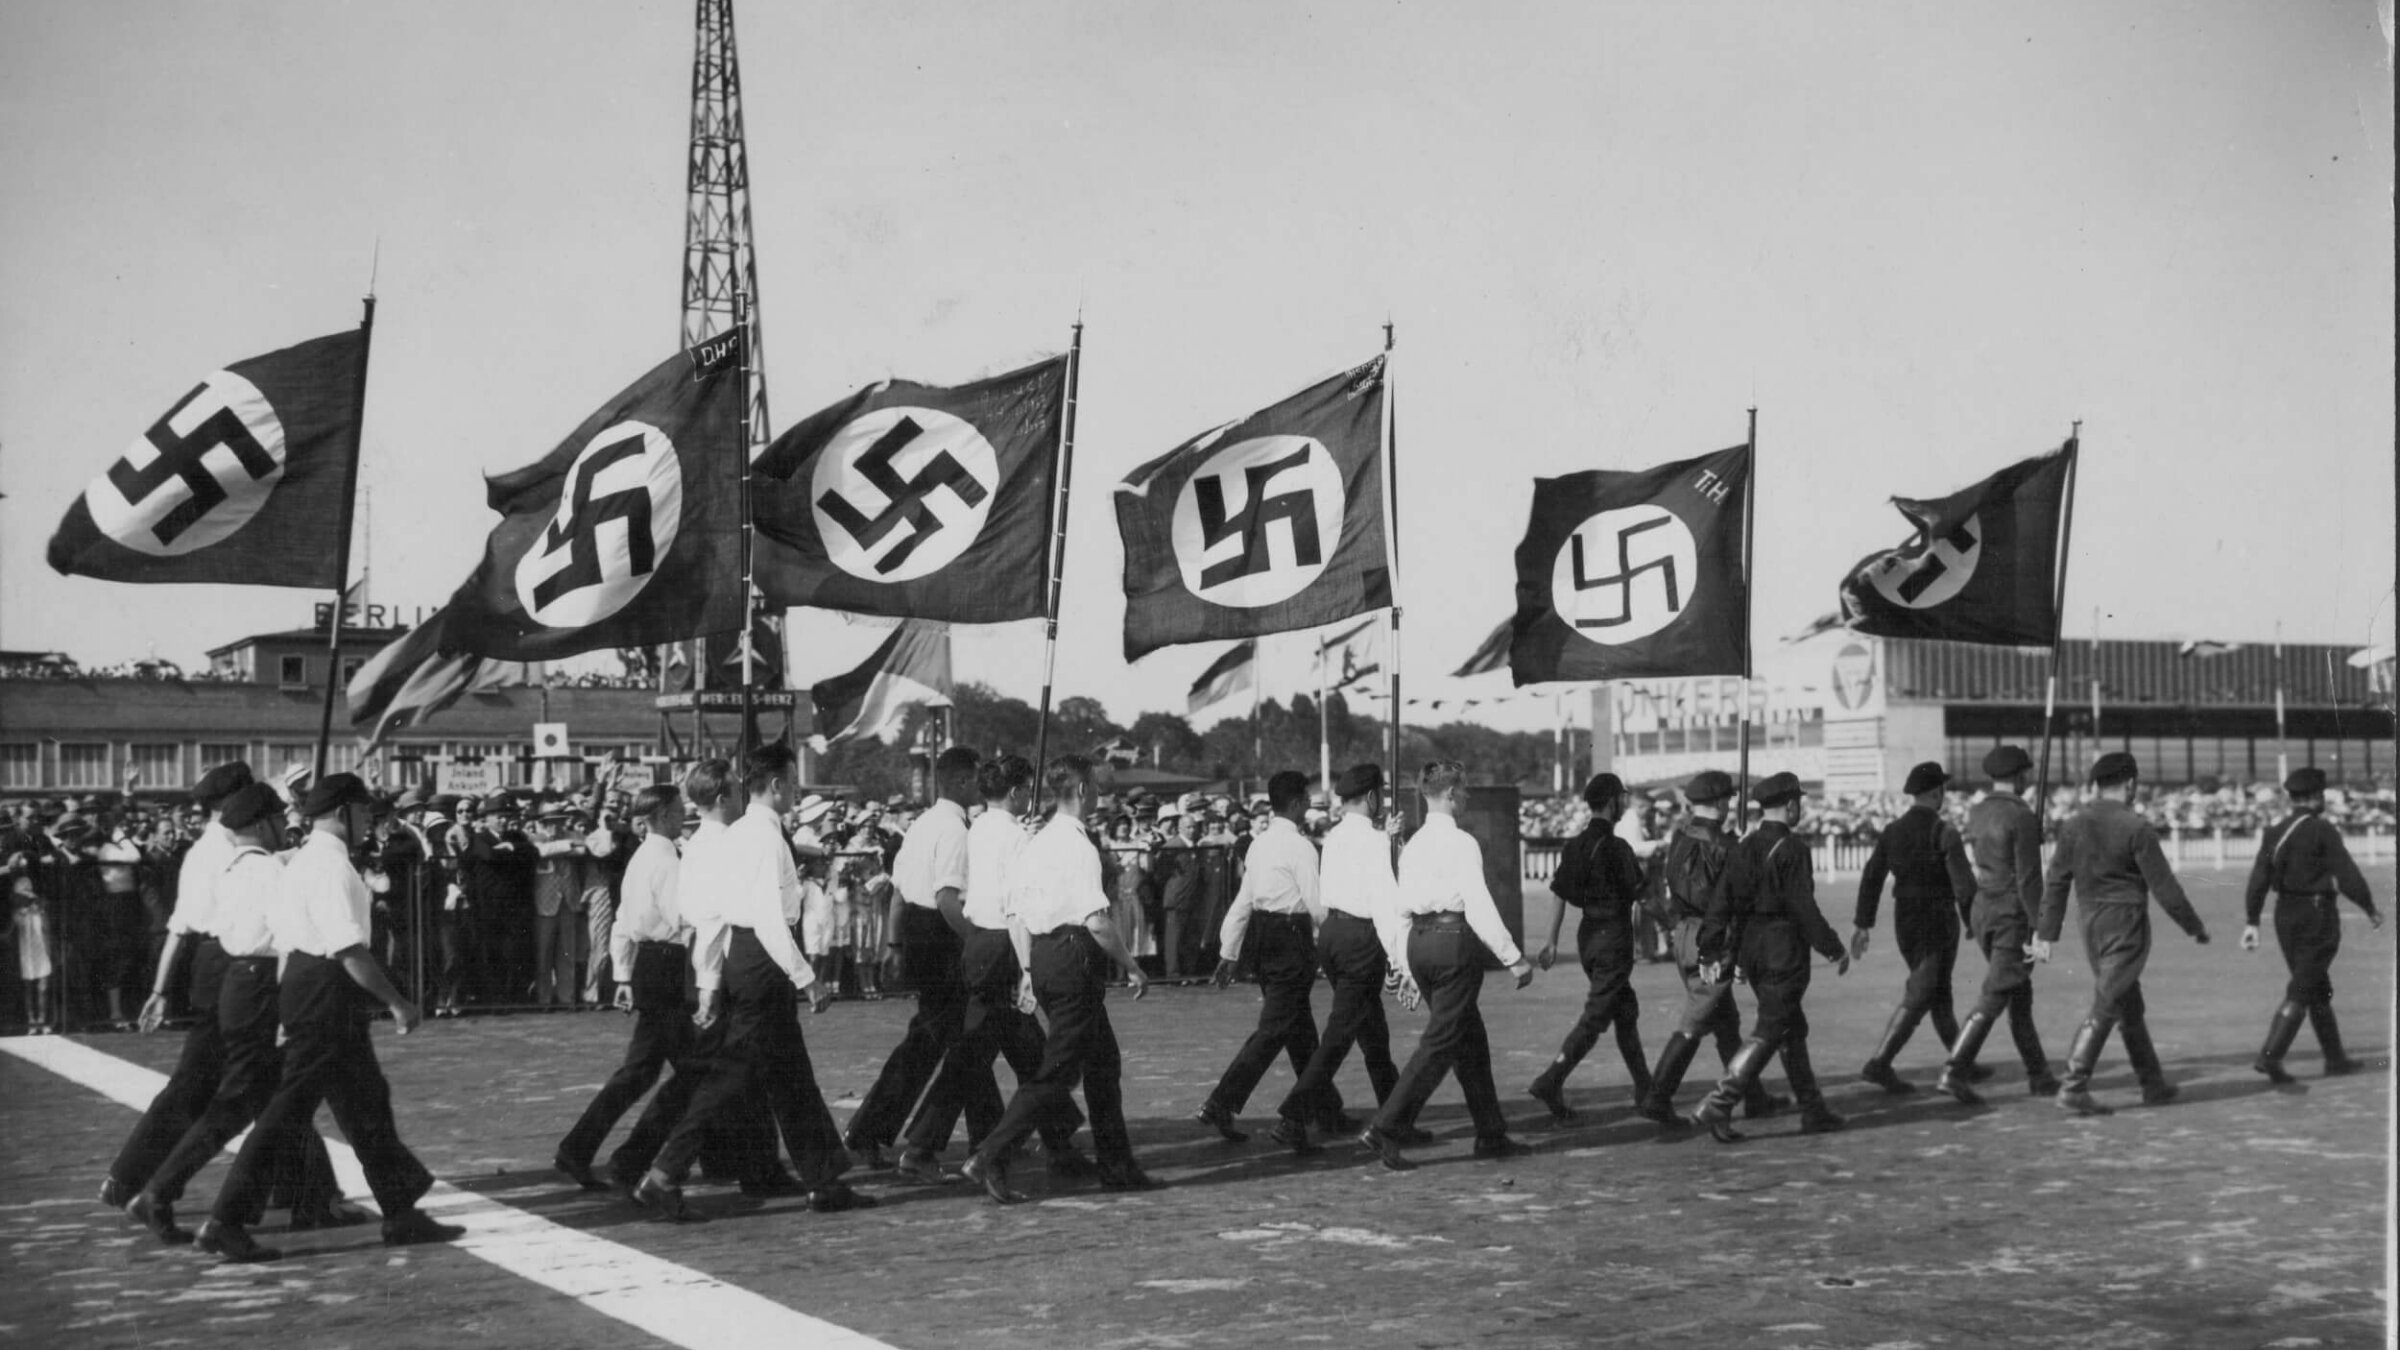 Hitler Youth recruits in a Nazi Party parade in Berlin on June 12, 1932. 